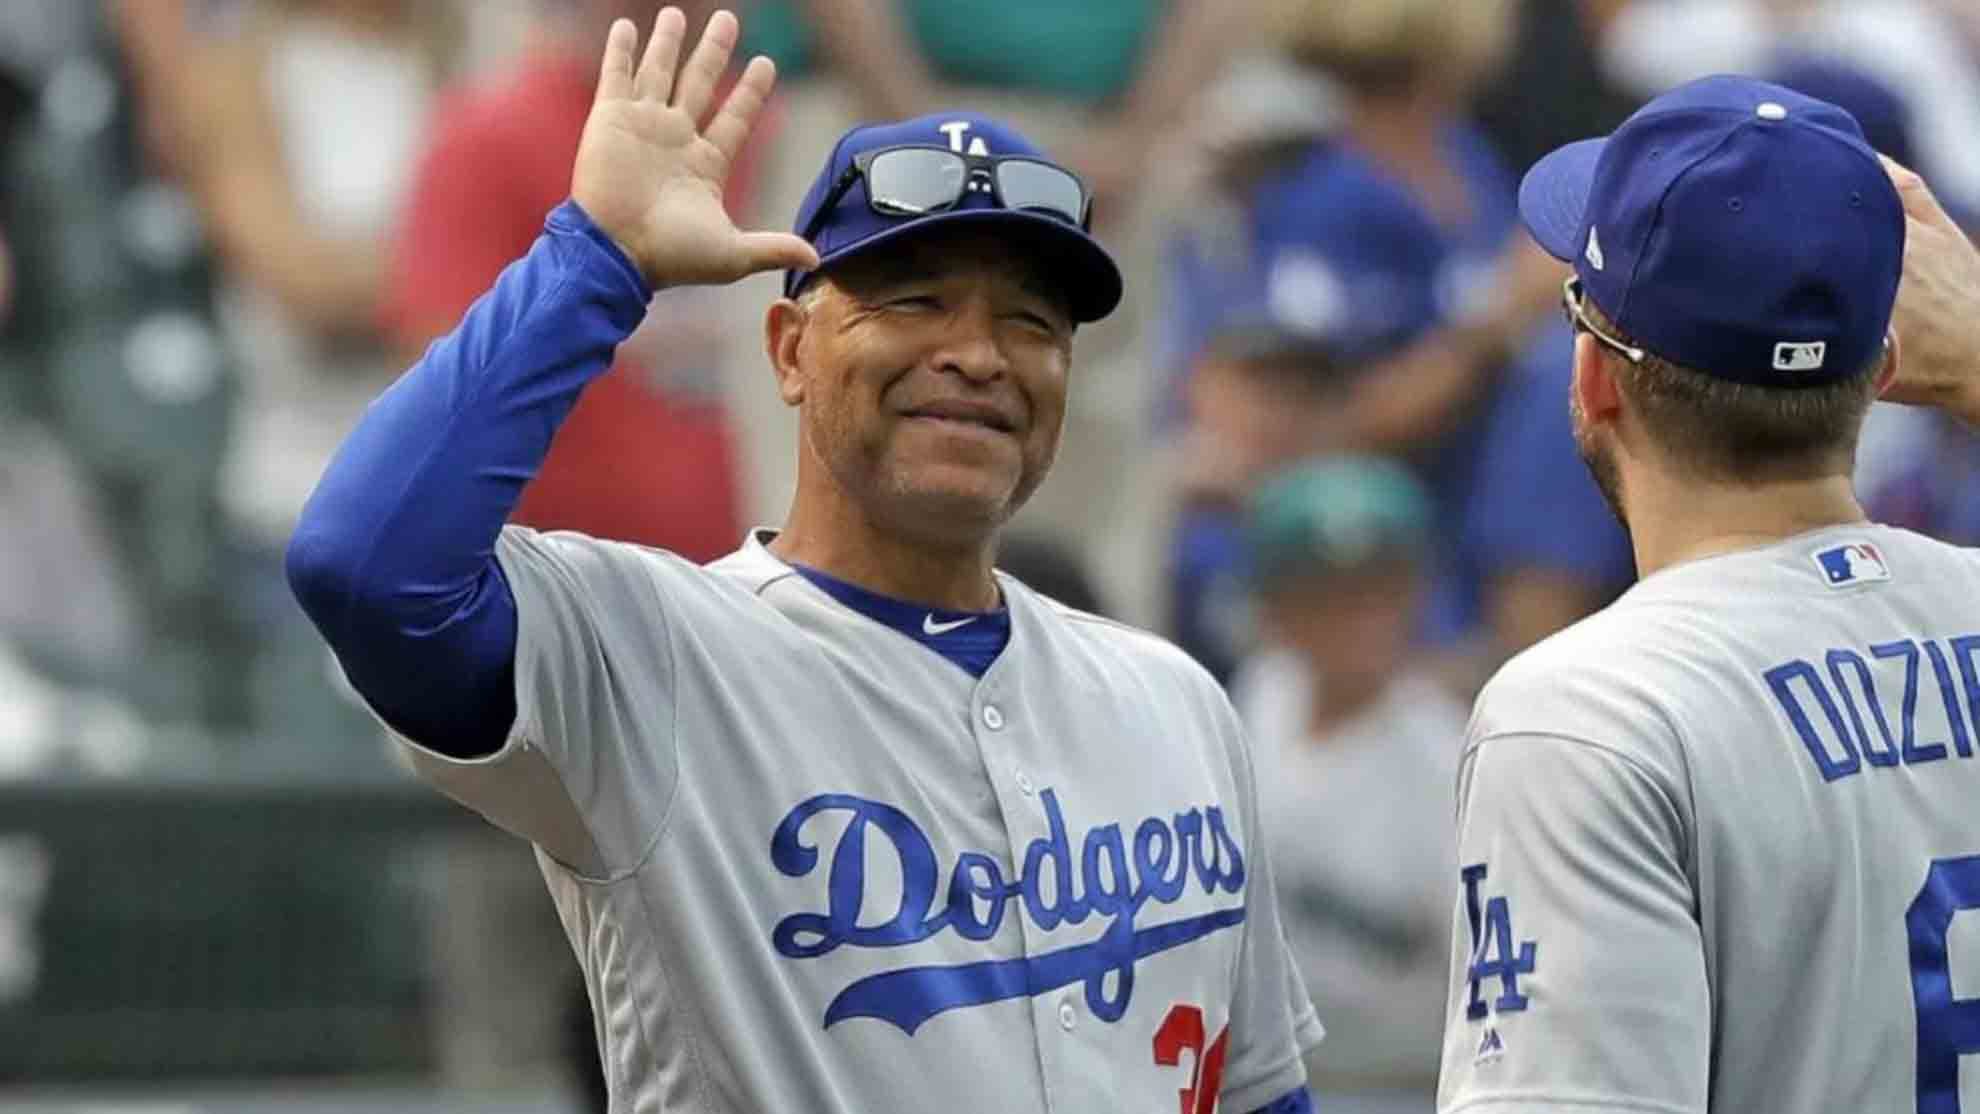 Dodgers' Will Smith gets major confidence boost from Dave Roberts